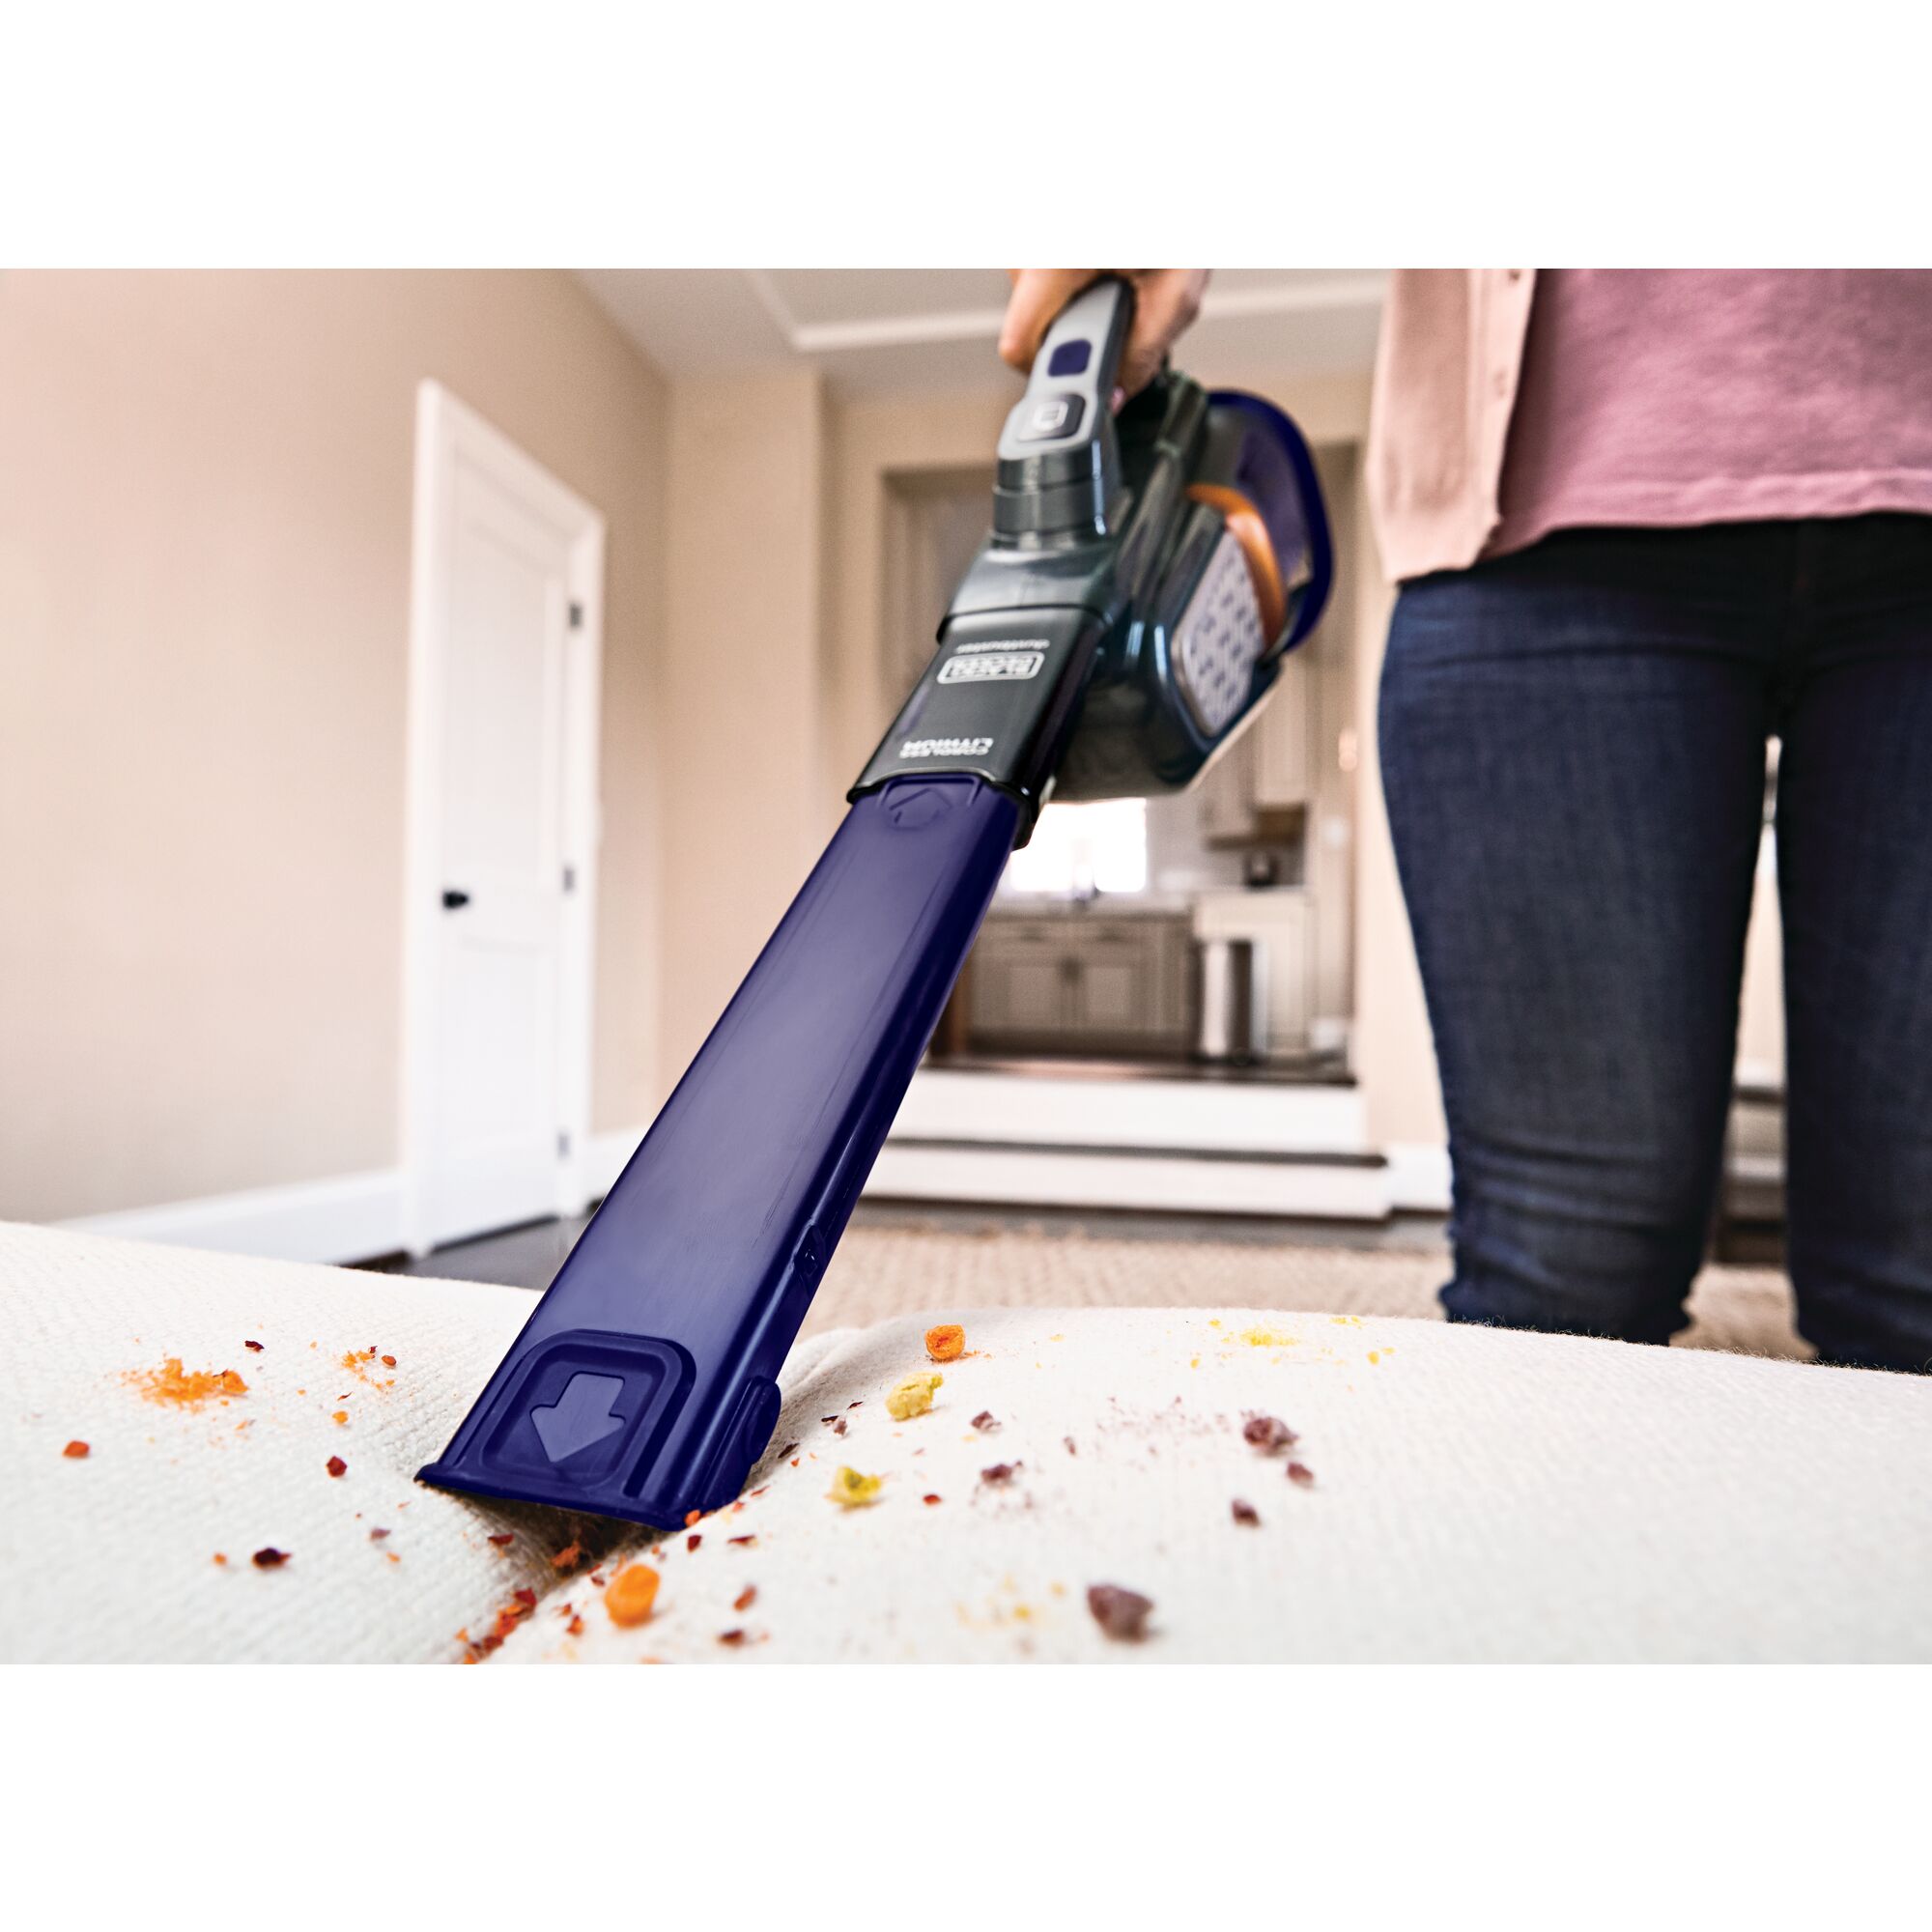 20 volt MAX dustbuster Advanced Clean pet hand vacuum with base charger and extra filter being used to clean debris on sofa.